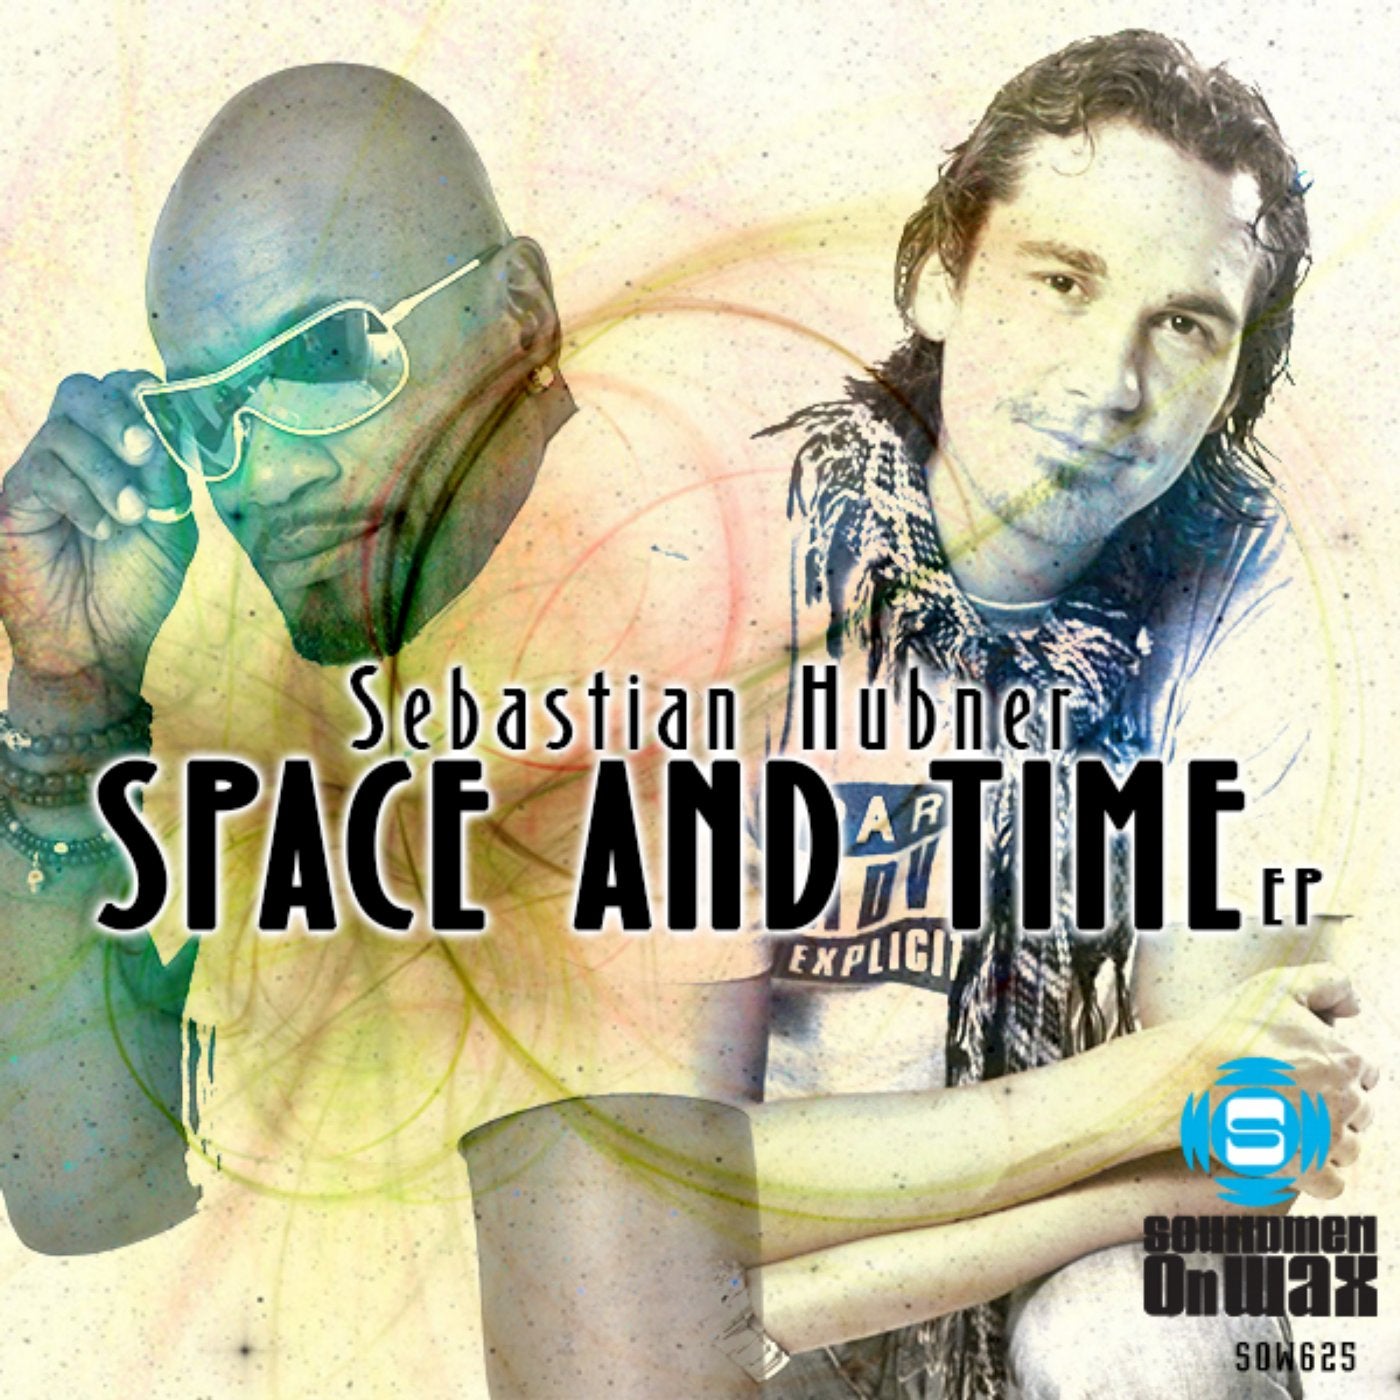 Space and Time EP